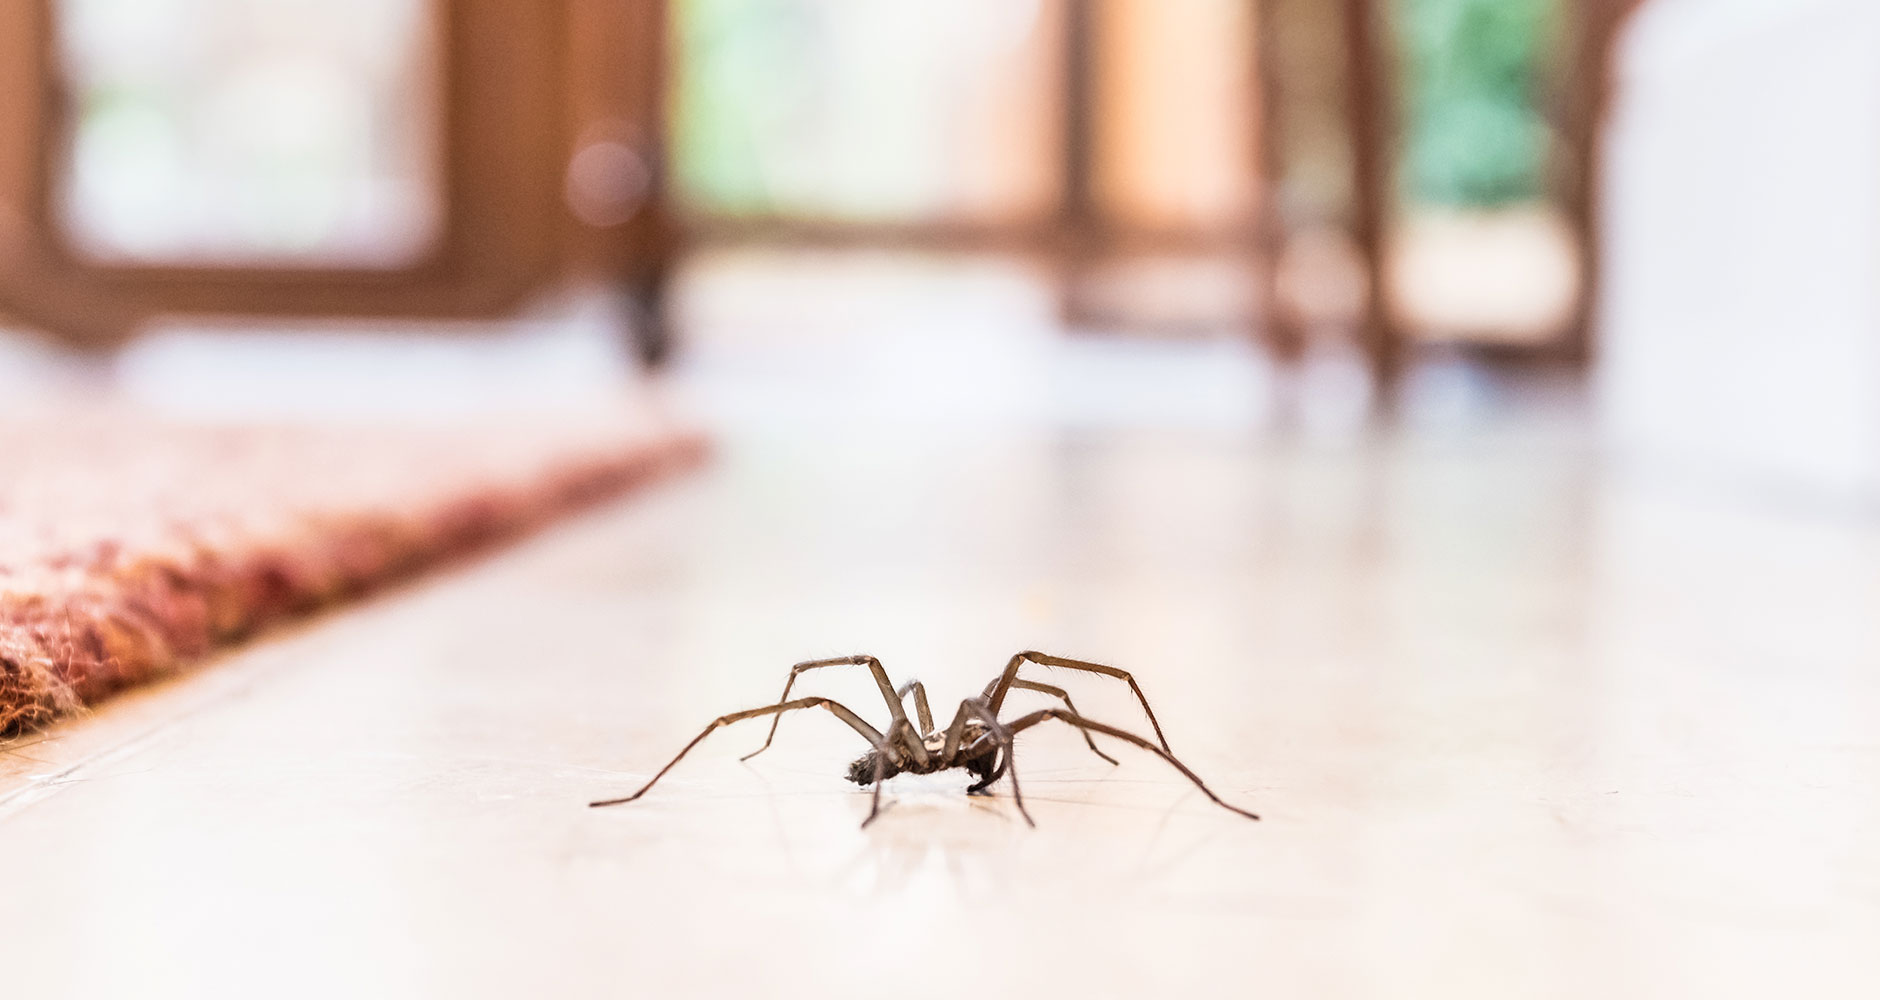 How do I keep spiders free at home?